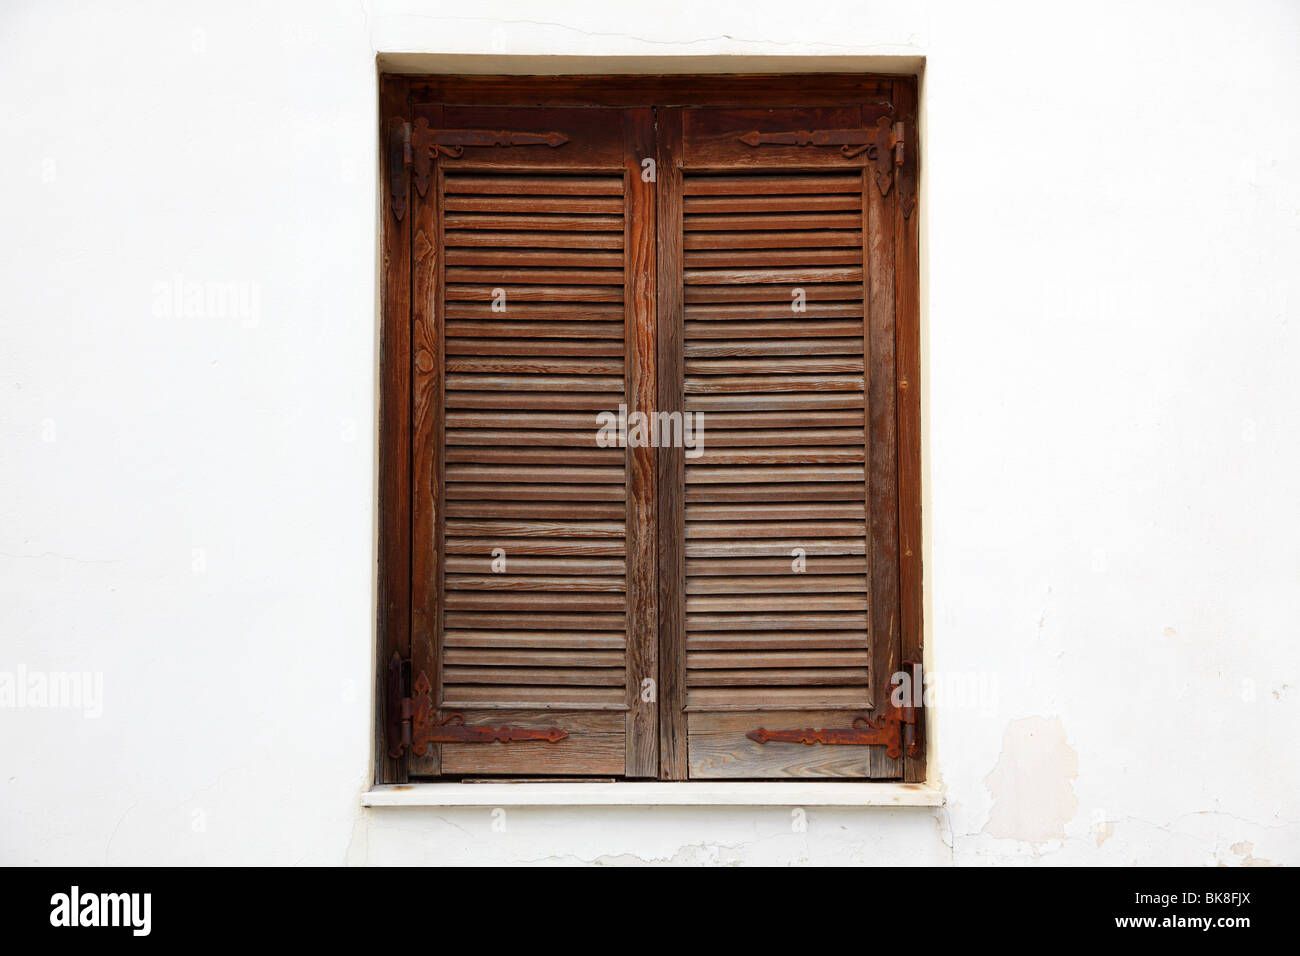 wooden shutters Stock Photo